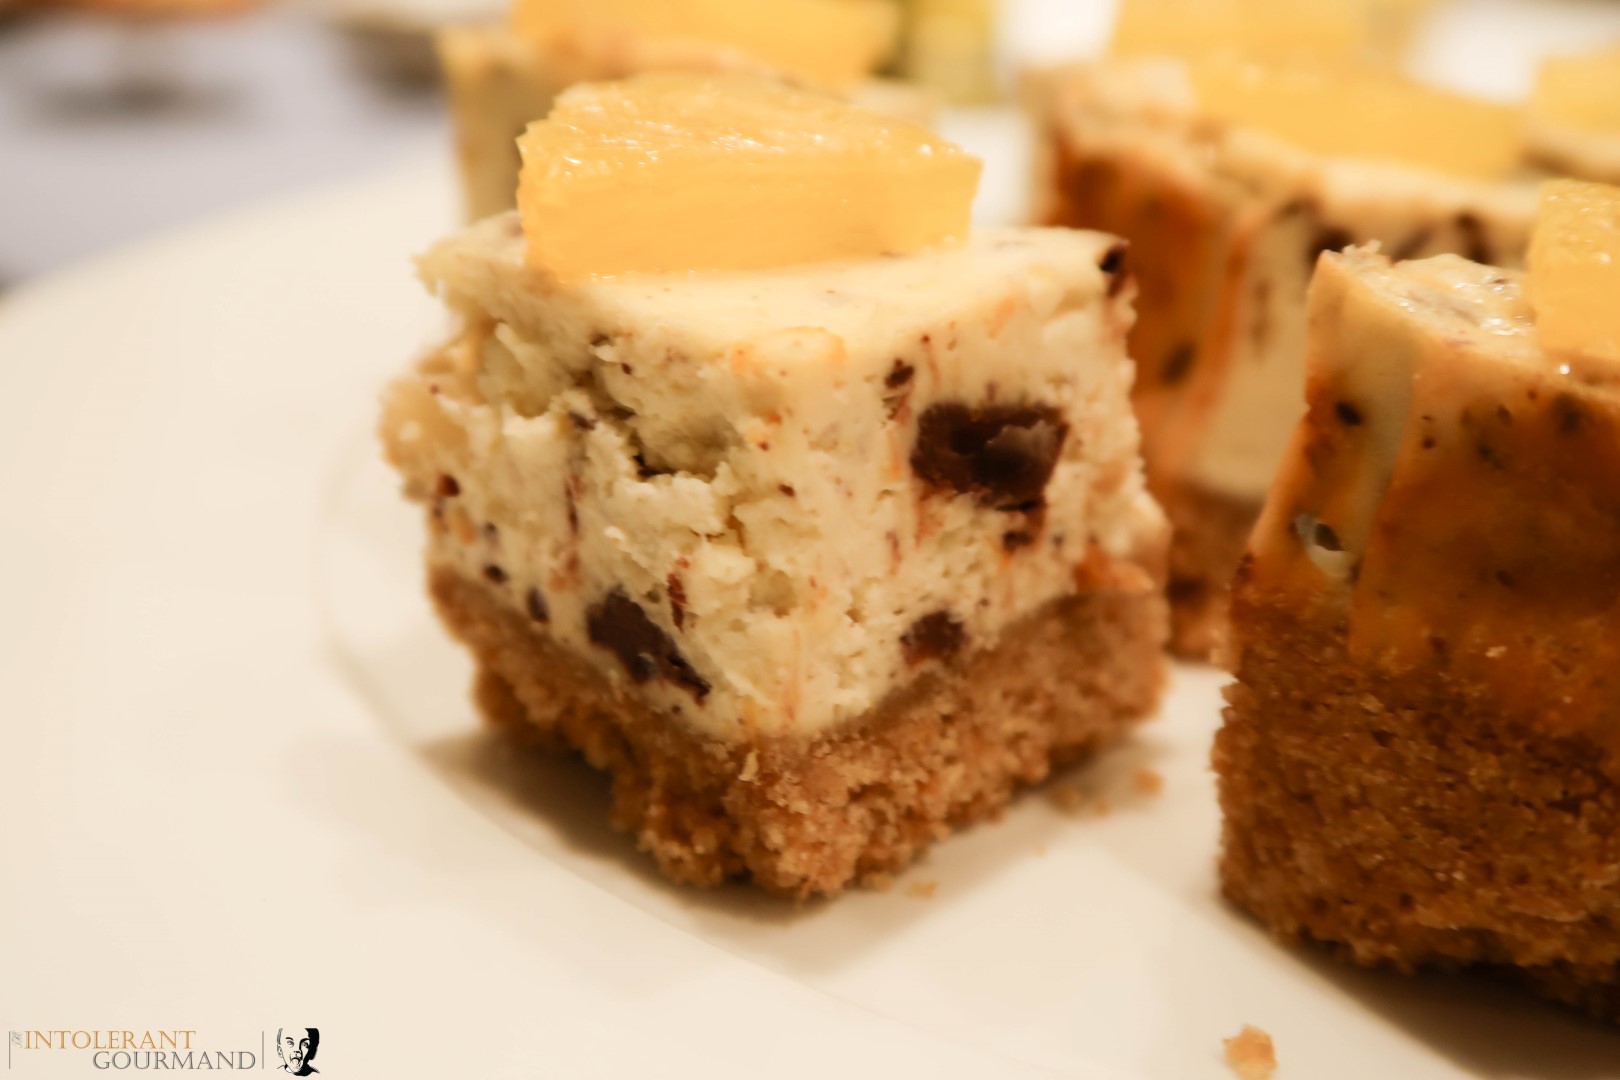 Splenda Sweet School - what's the difference between sugar and sweetener? Learn the small changes you can implement to create big differences, along with delicious recipes including this dairy-free, gluten-free and vegan chocolate, orange and ginger cheesecake all made using Splenda! 